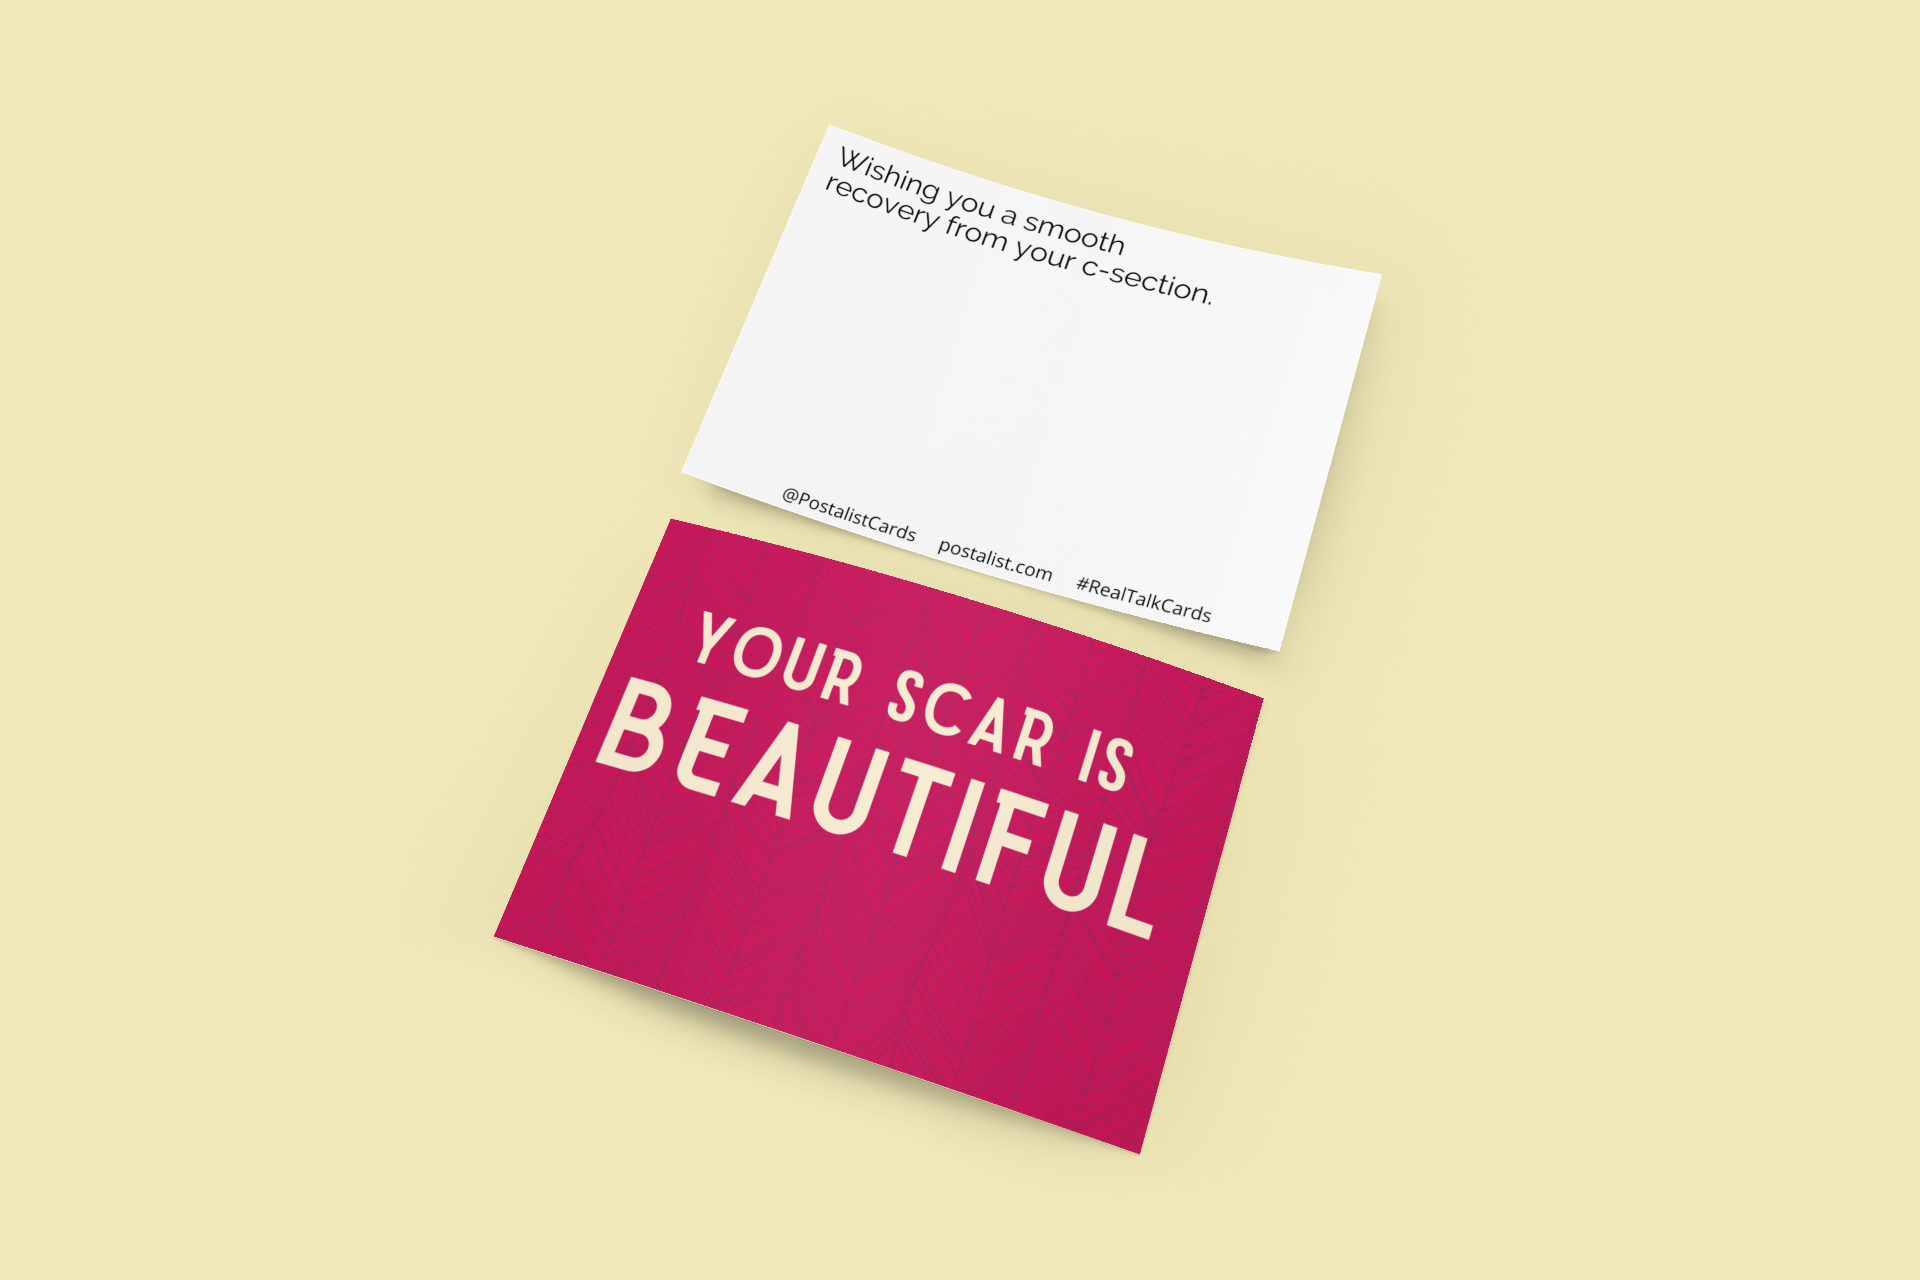 birth cards - your scar is beautiful